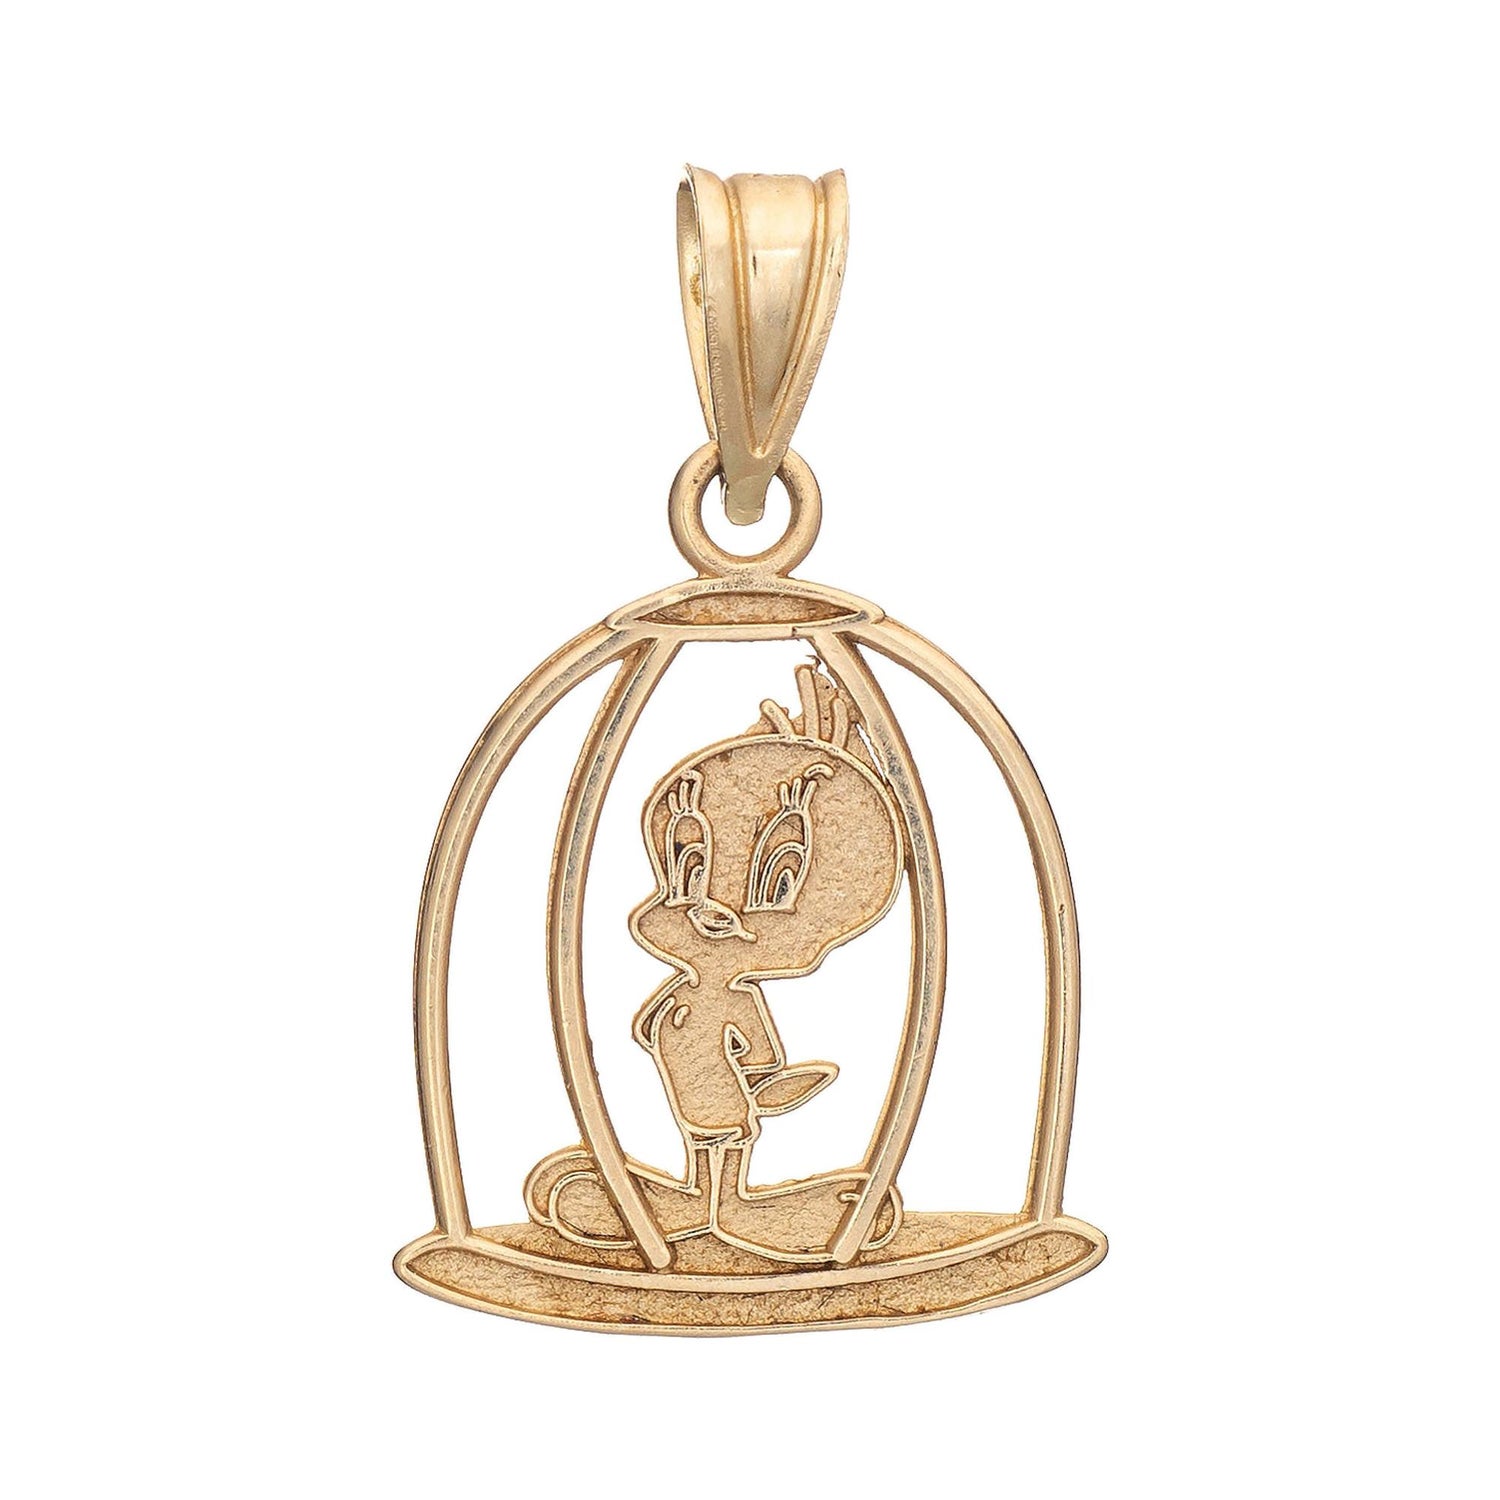 Bird Cage Charm - 2 For Sale on 1stDibs